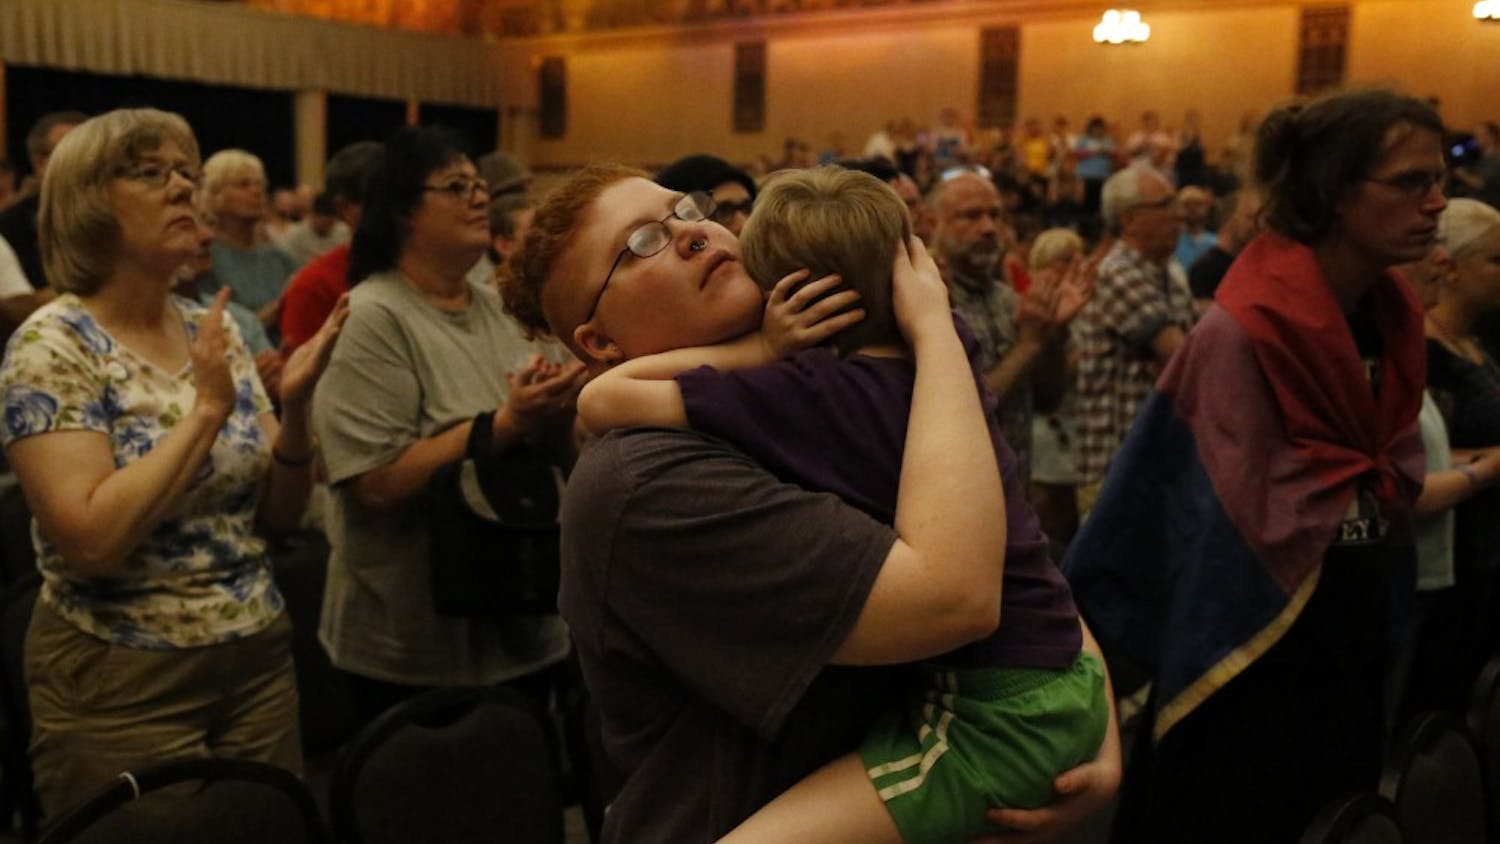 Sebastian Calhoun holds his 6 year old son during a vigil, which took place in the Egyptian Room at the Old National Centre Sunday evening and was sponsored by Indy Pride in response to the recent mass shooting that took place at a gay night club in Orlando, Florida. "I came here for Solidarity," he said. 